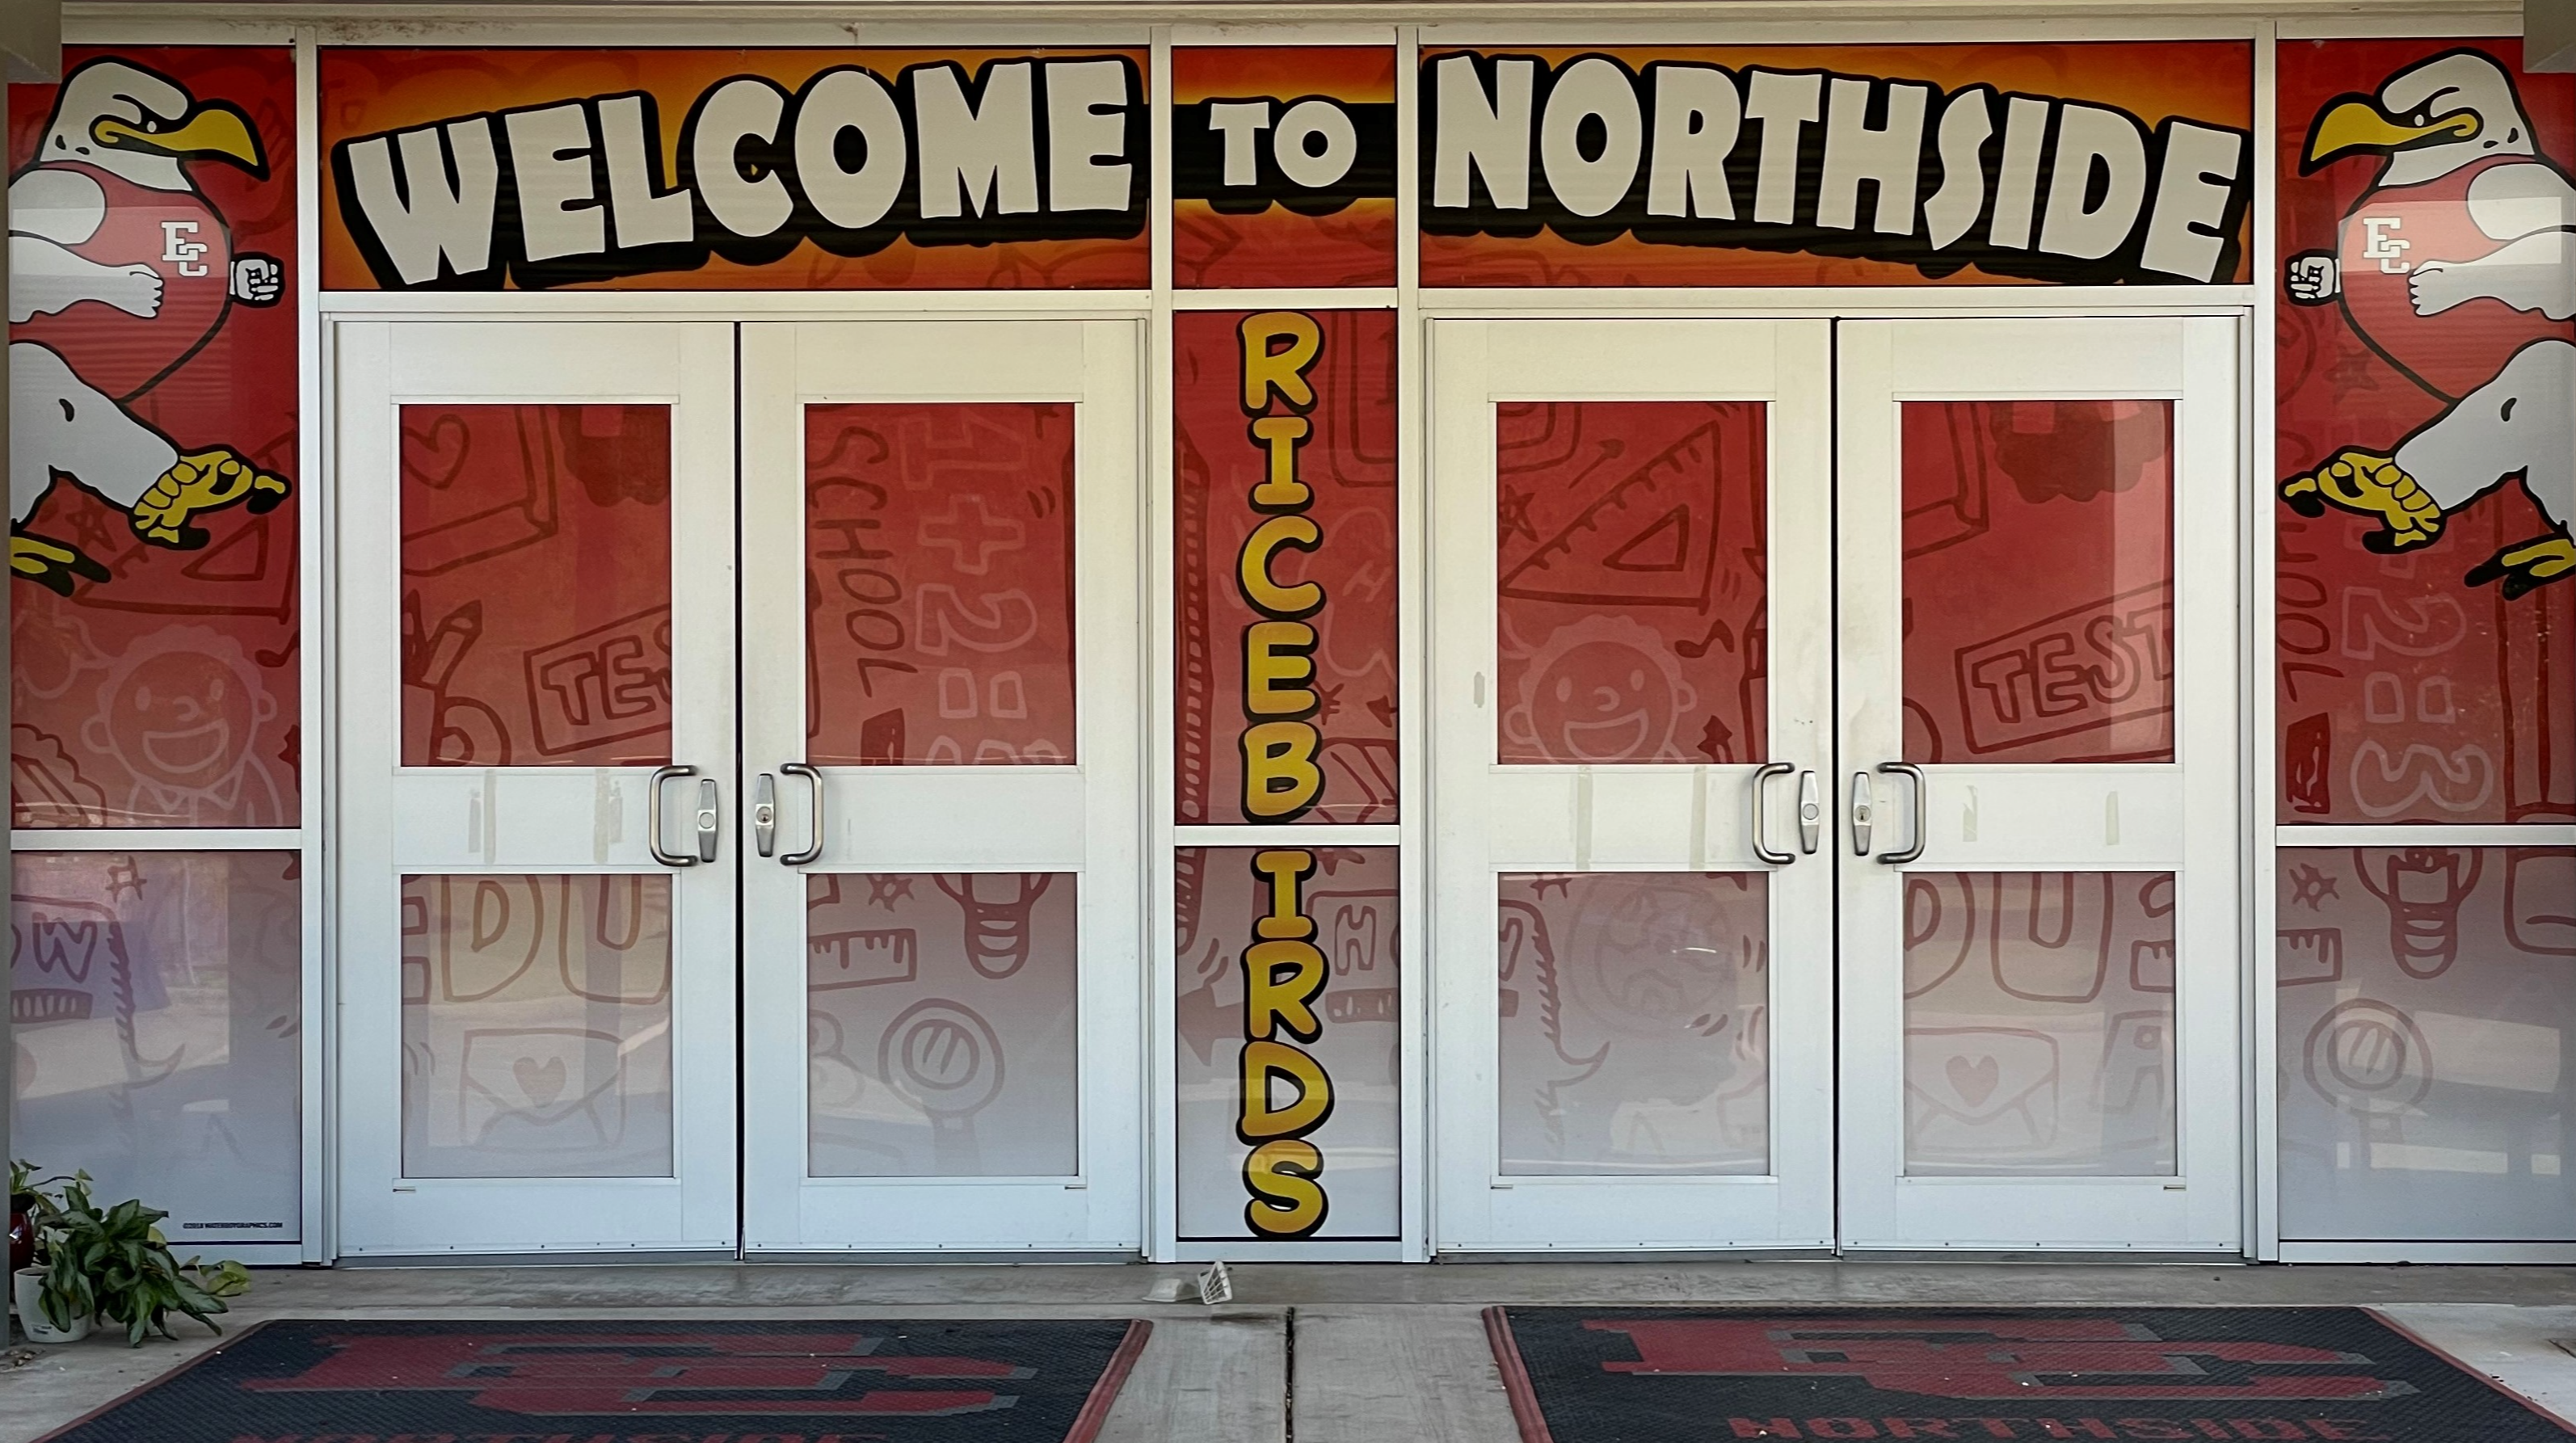 front doors that say welcome to northside ricebirds